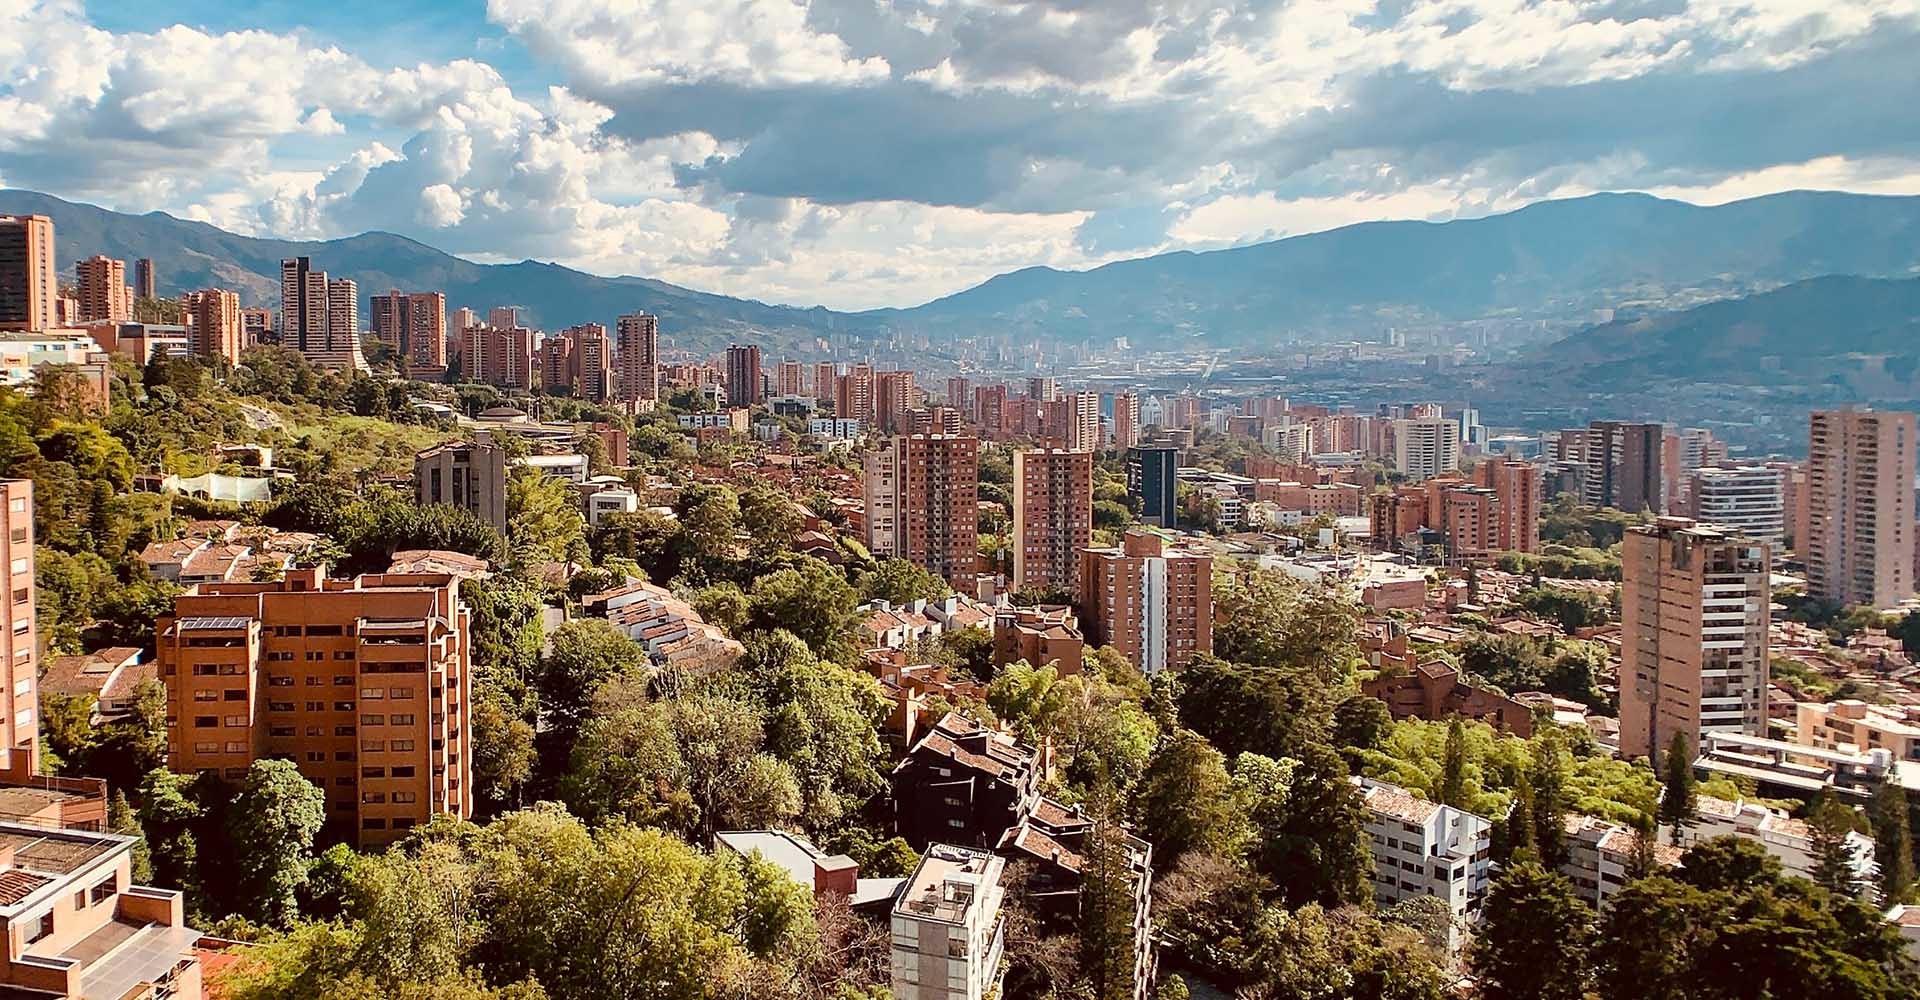 Medellin: data and infrastructures in contrast to its troubled past